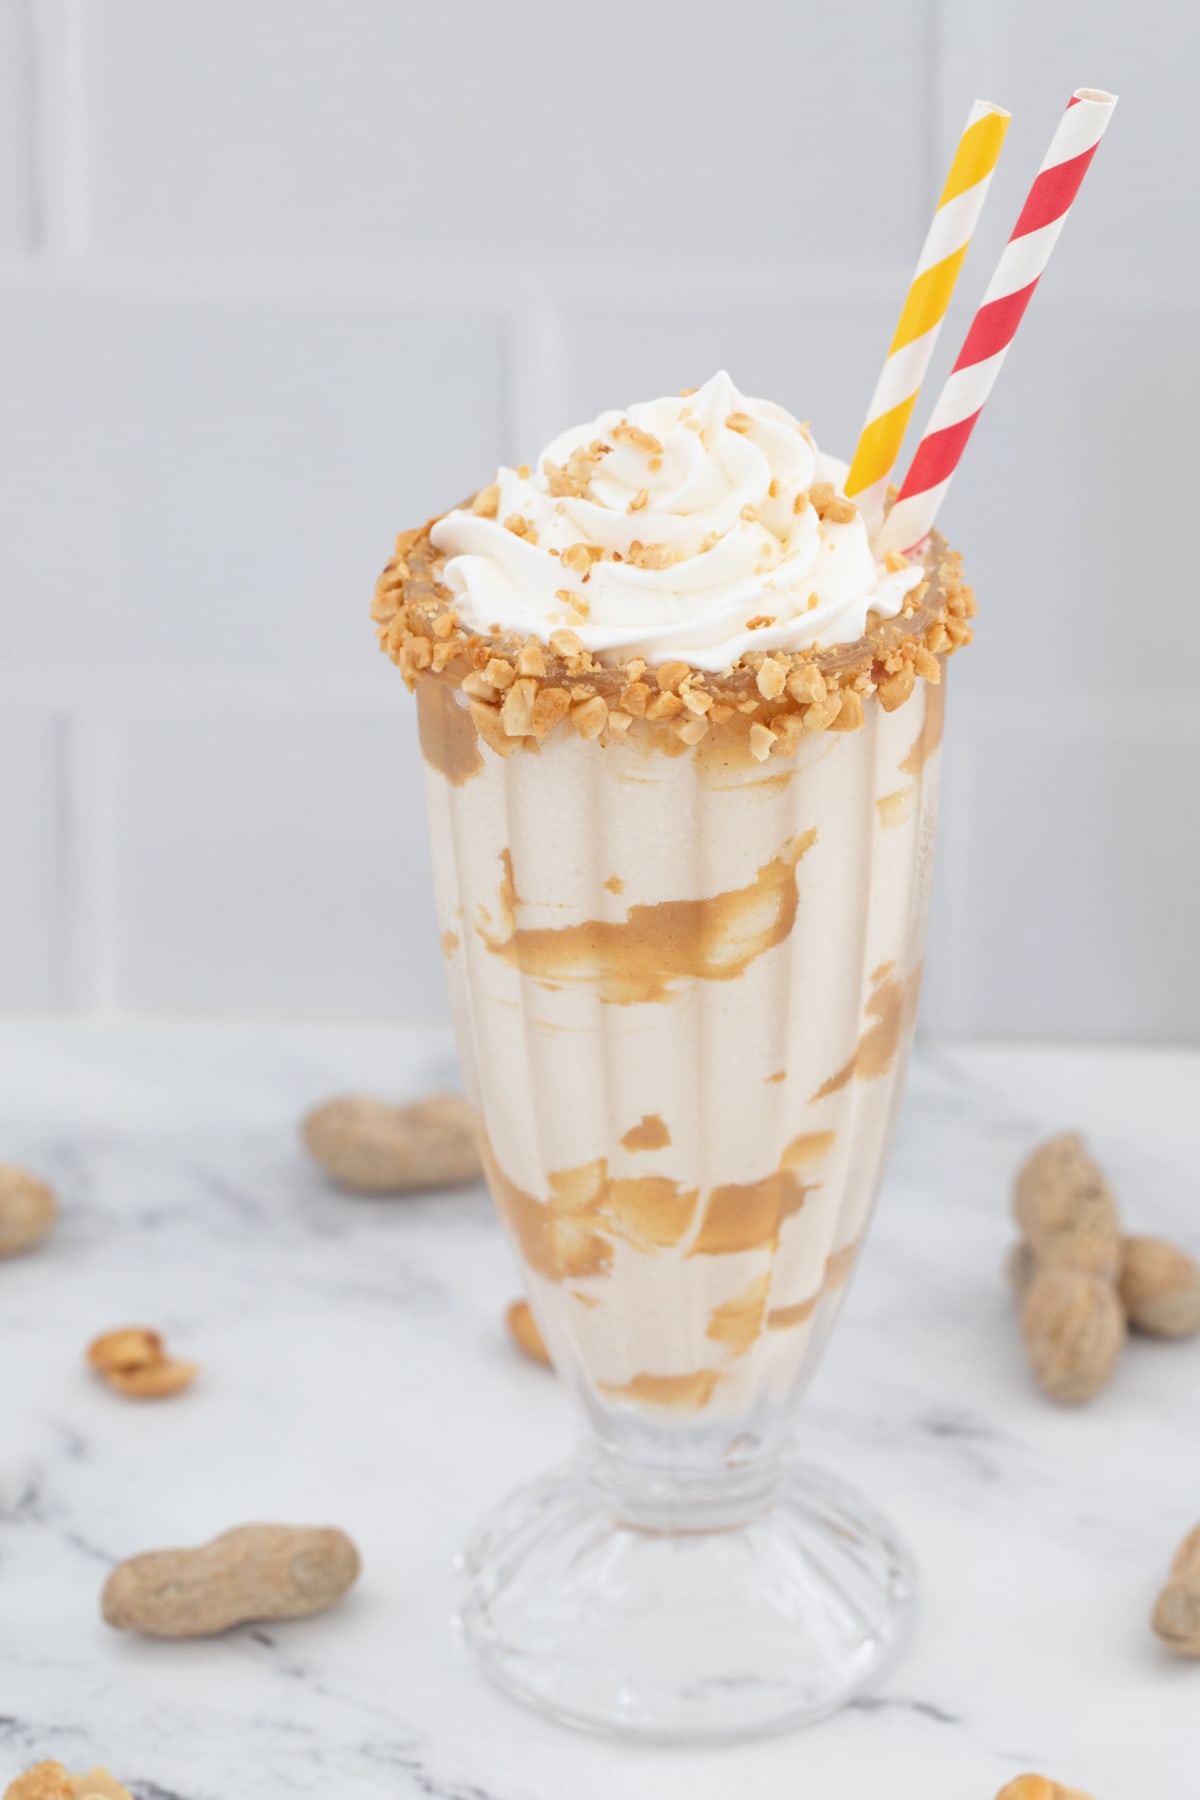 Peanut Butter Milkshake with red and yellow straws